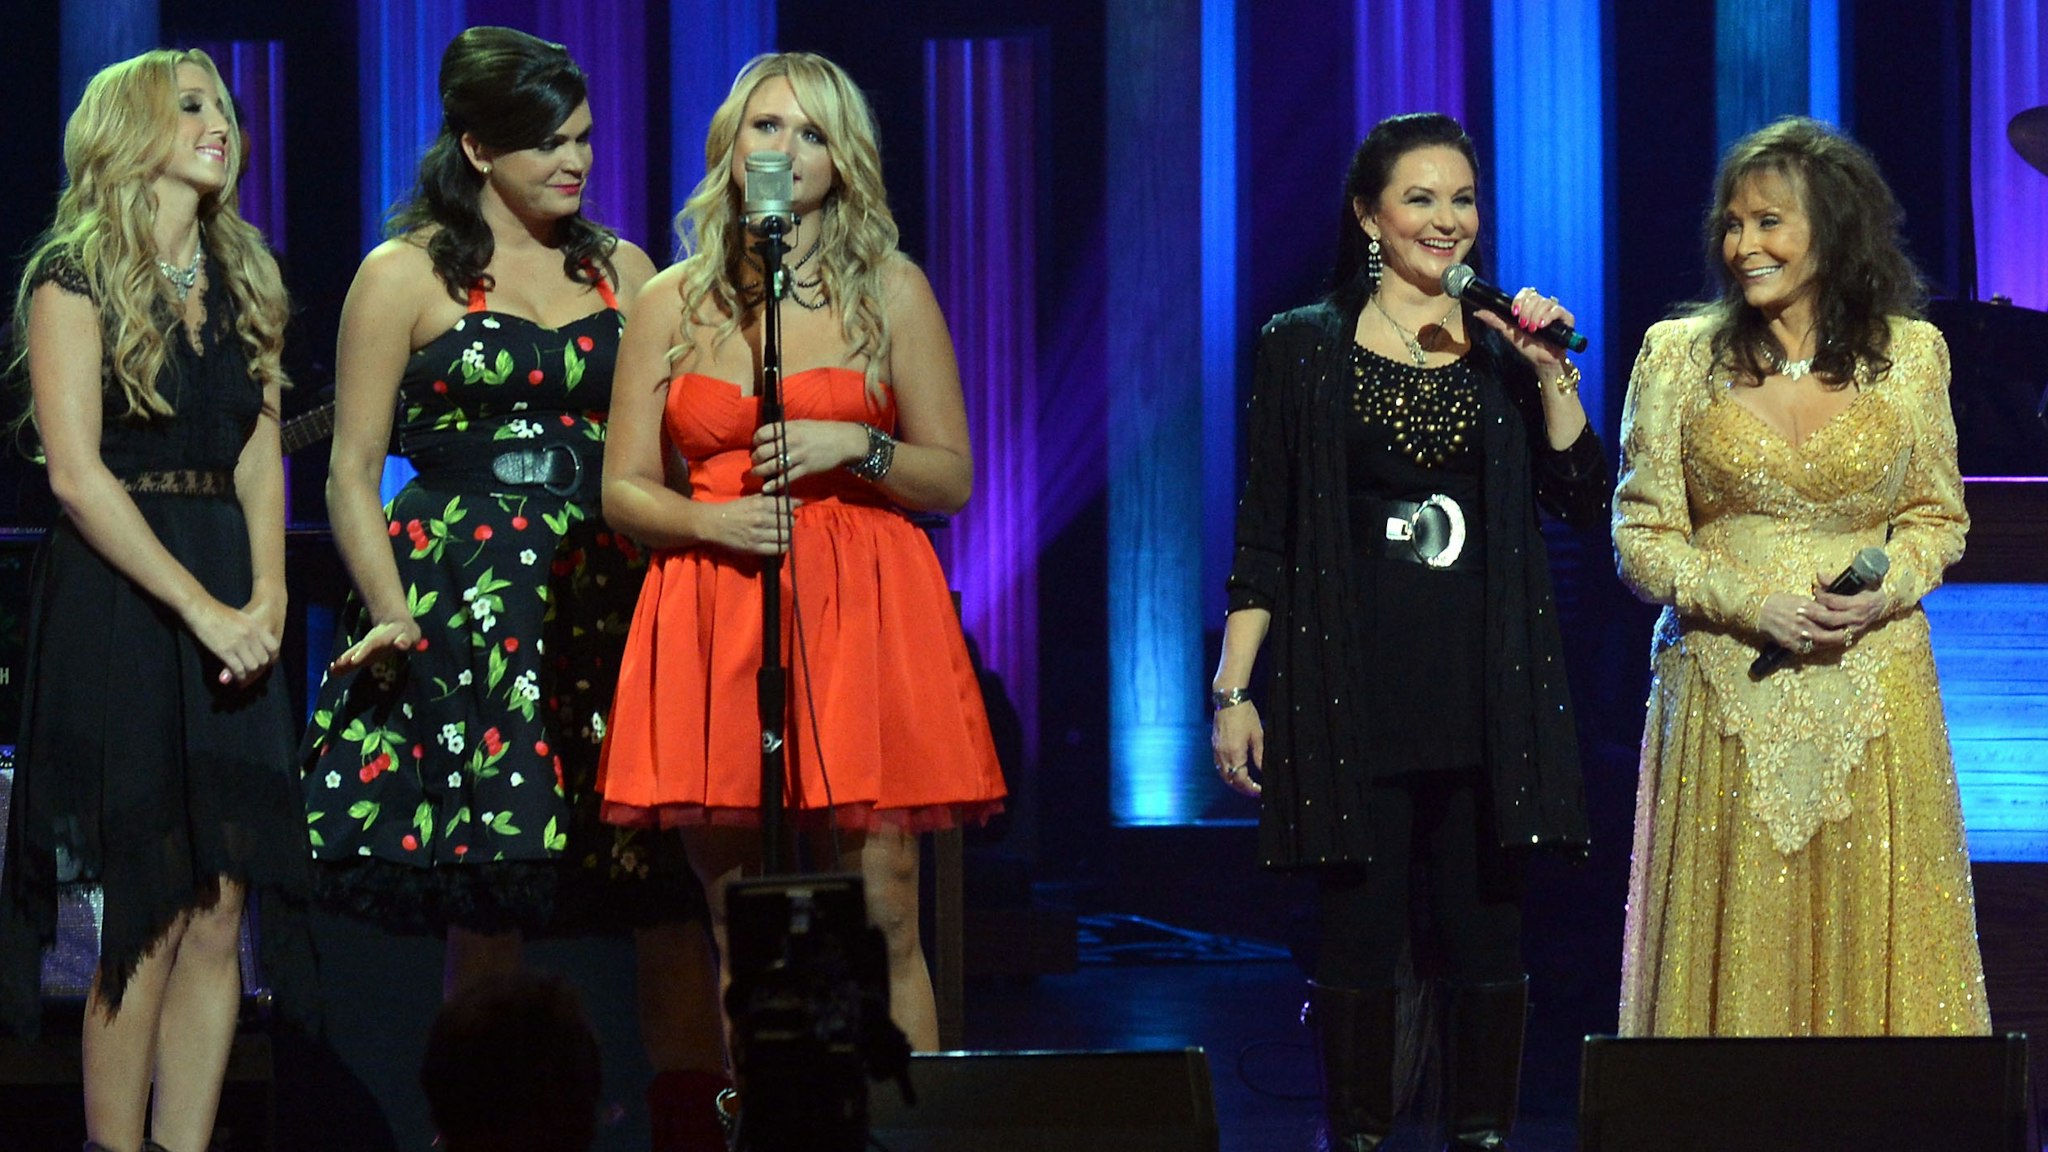 Ashley Monroe, Angaleena Presley and Miranda Lambert of Pistol Annies, Crystal Gayle, Loretta Lynn and Lee Ann Womack perform the finale during the celebration of Loretta Lynn's 50th Opry Anniversary at The Grand Ole Opry on September 25, 2012 in Nashville, Tennessee.